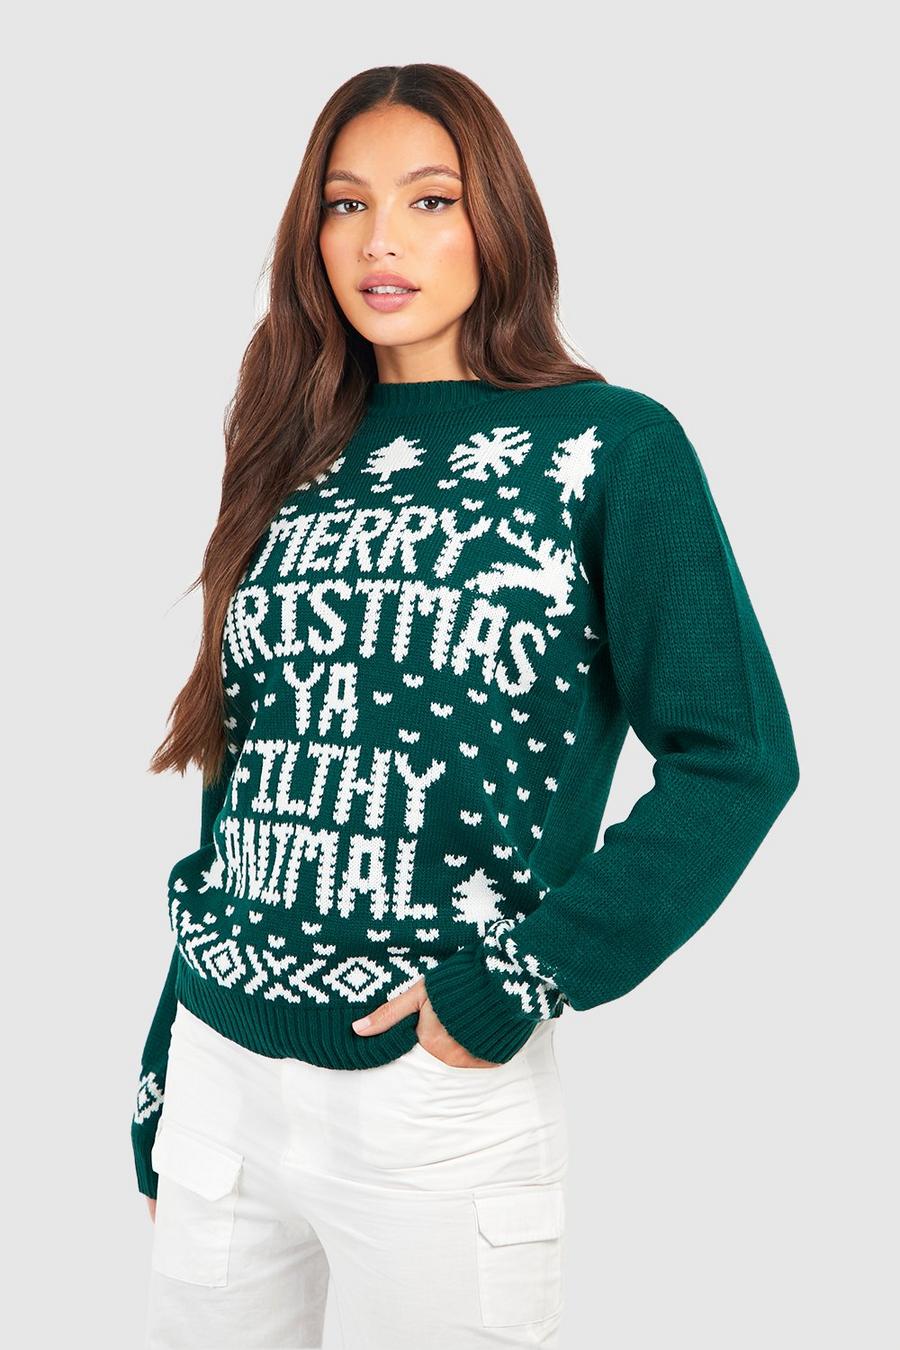 Bottle Tall Filthy Animal Christmas Sweater